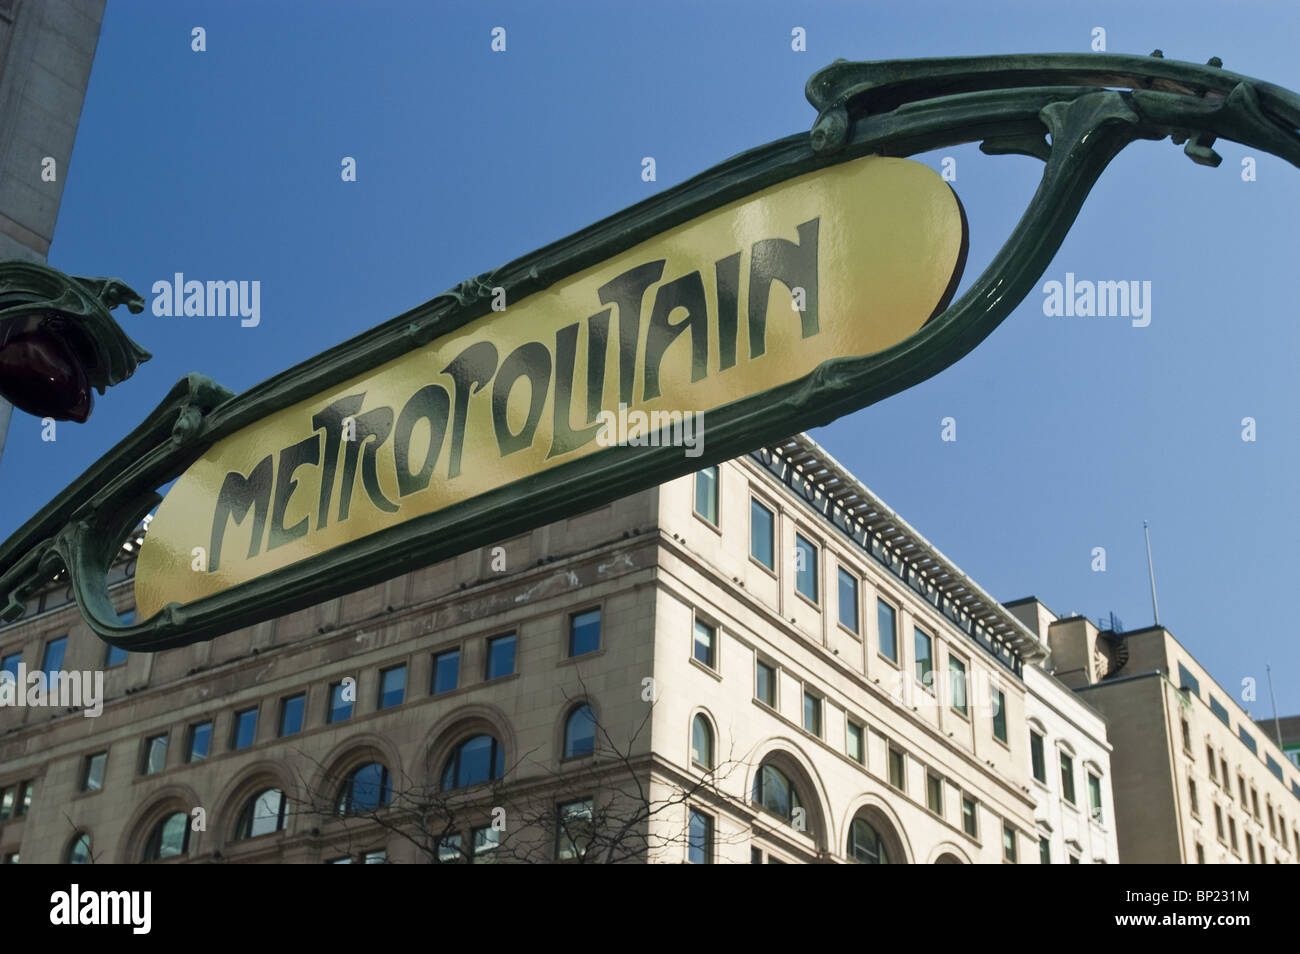 Metropolitain sign of Montreal Metro at Square-Victoria by Hector Guimard in art nouveau style, Quebec, Canada Stock Photo